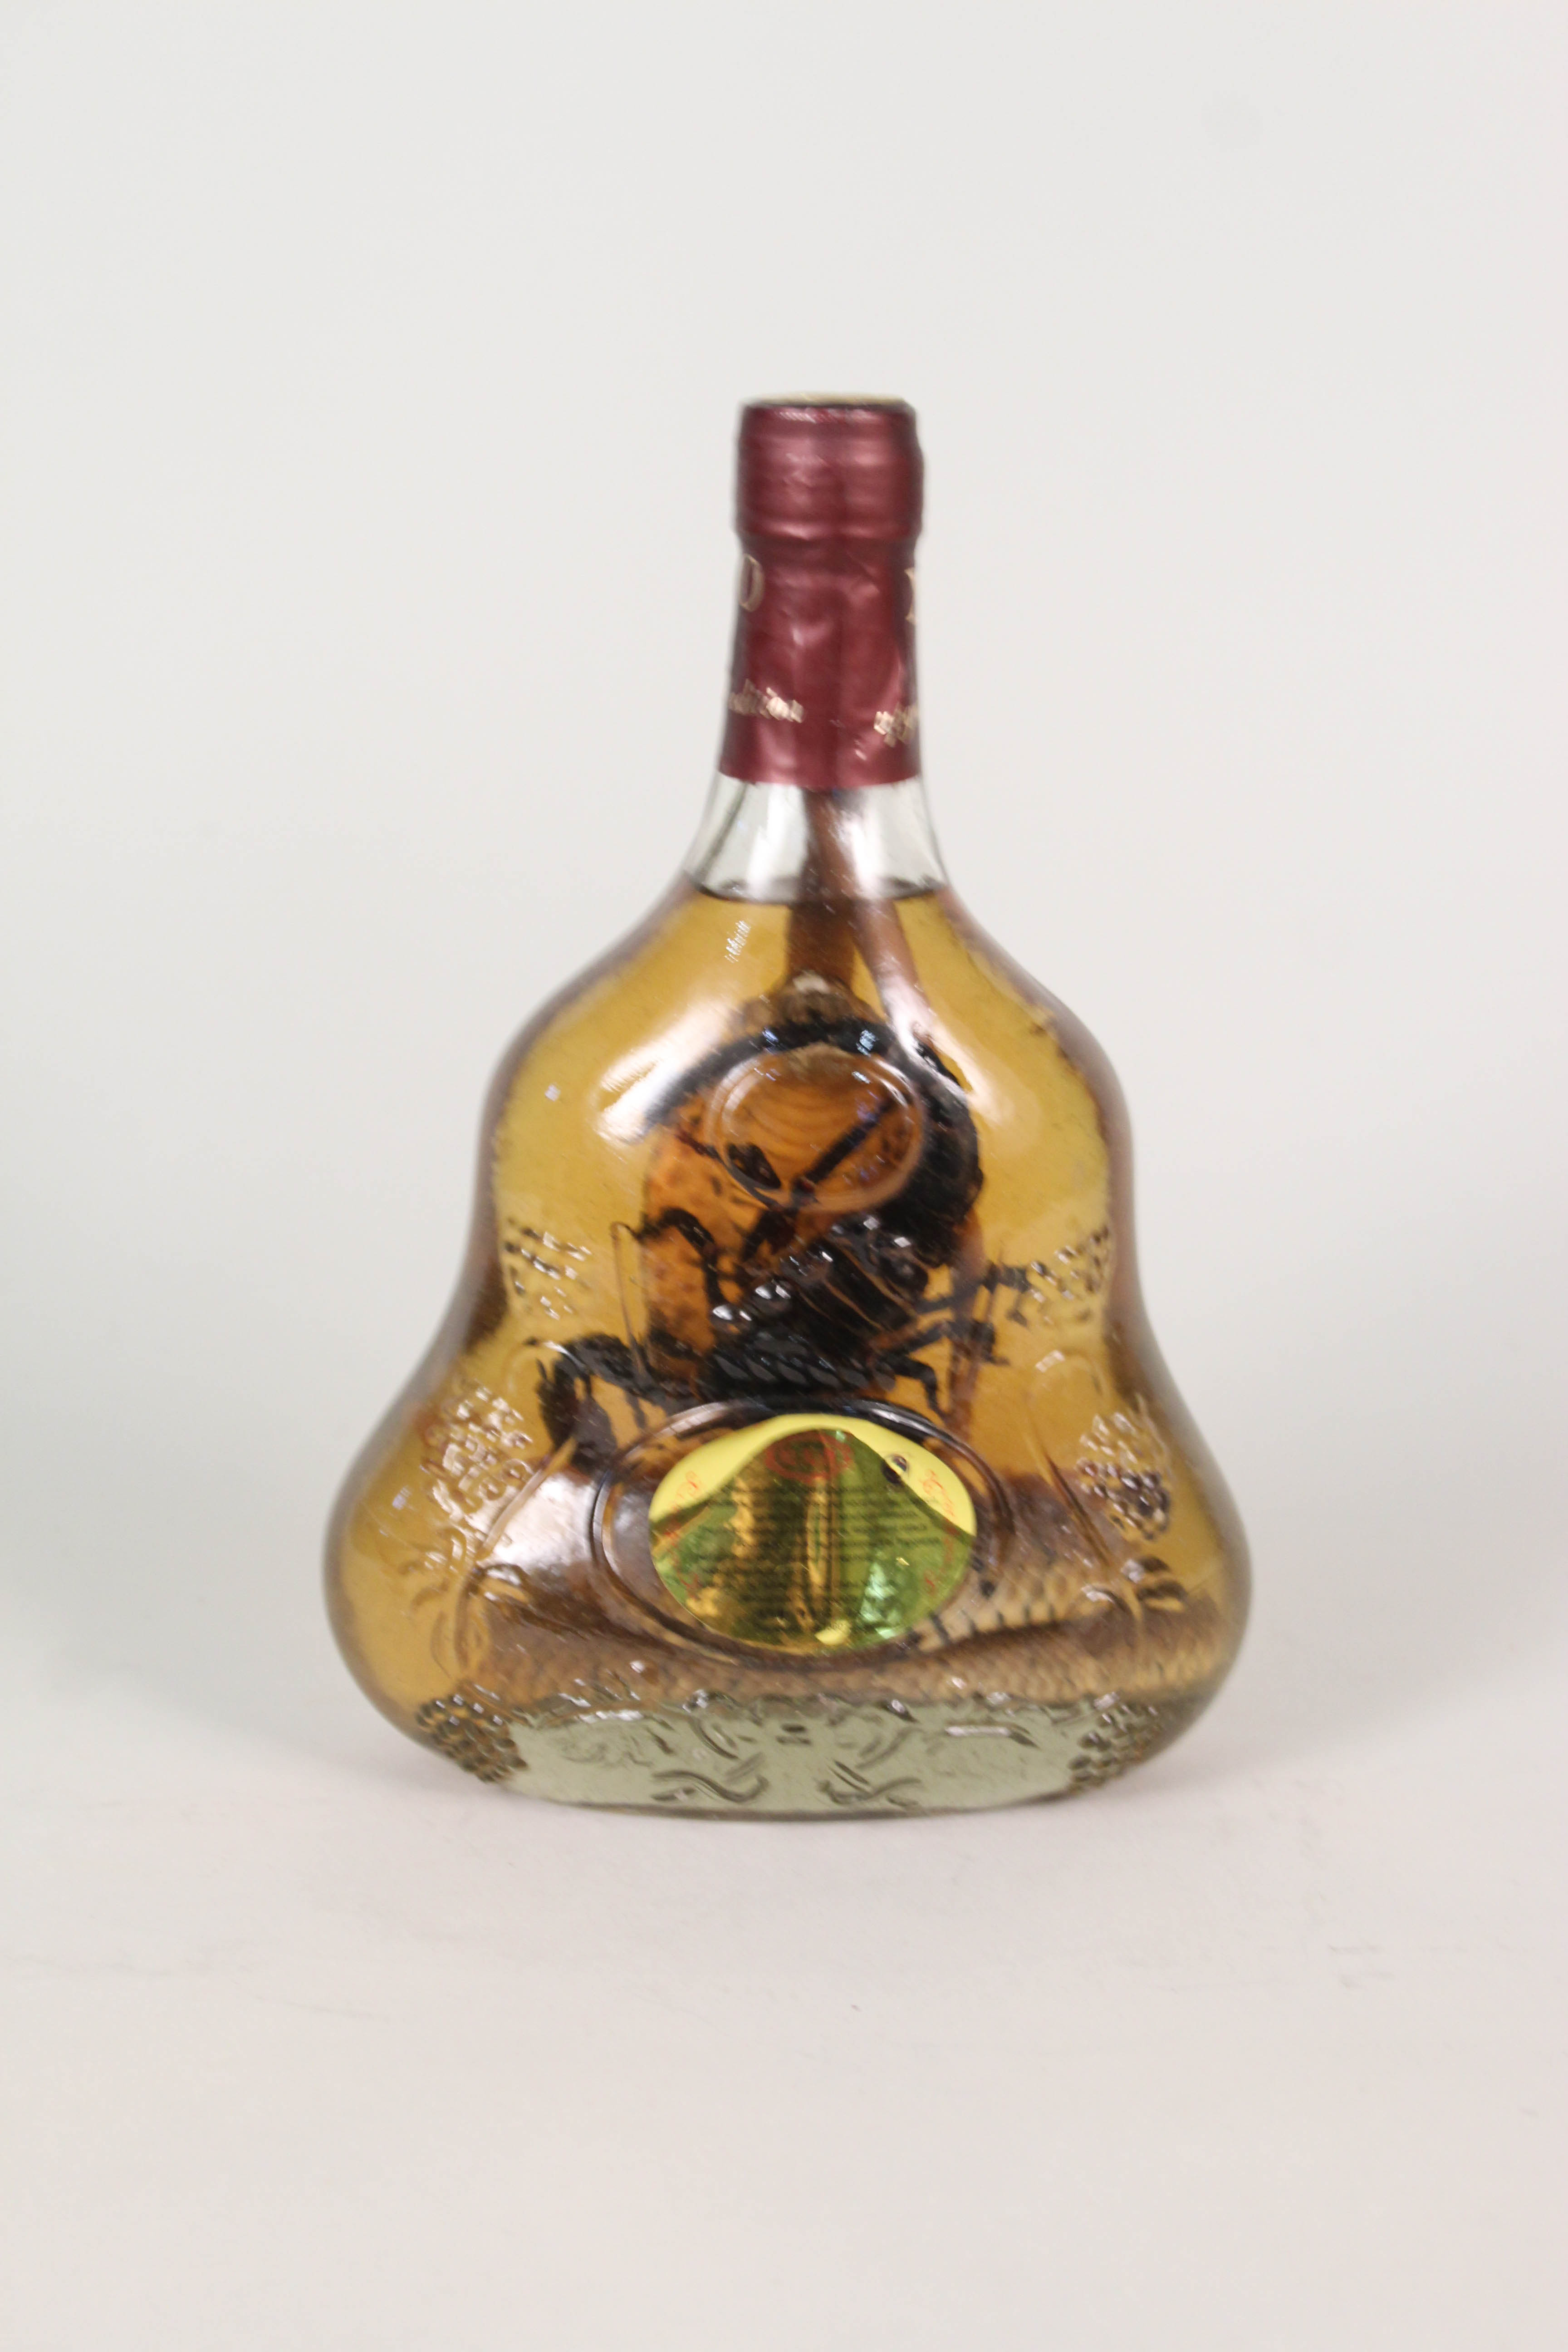 A bottle of scorpion and cobra wine (not for consumption)